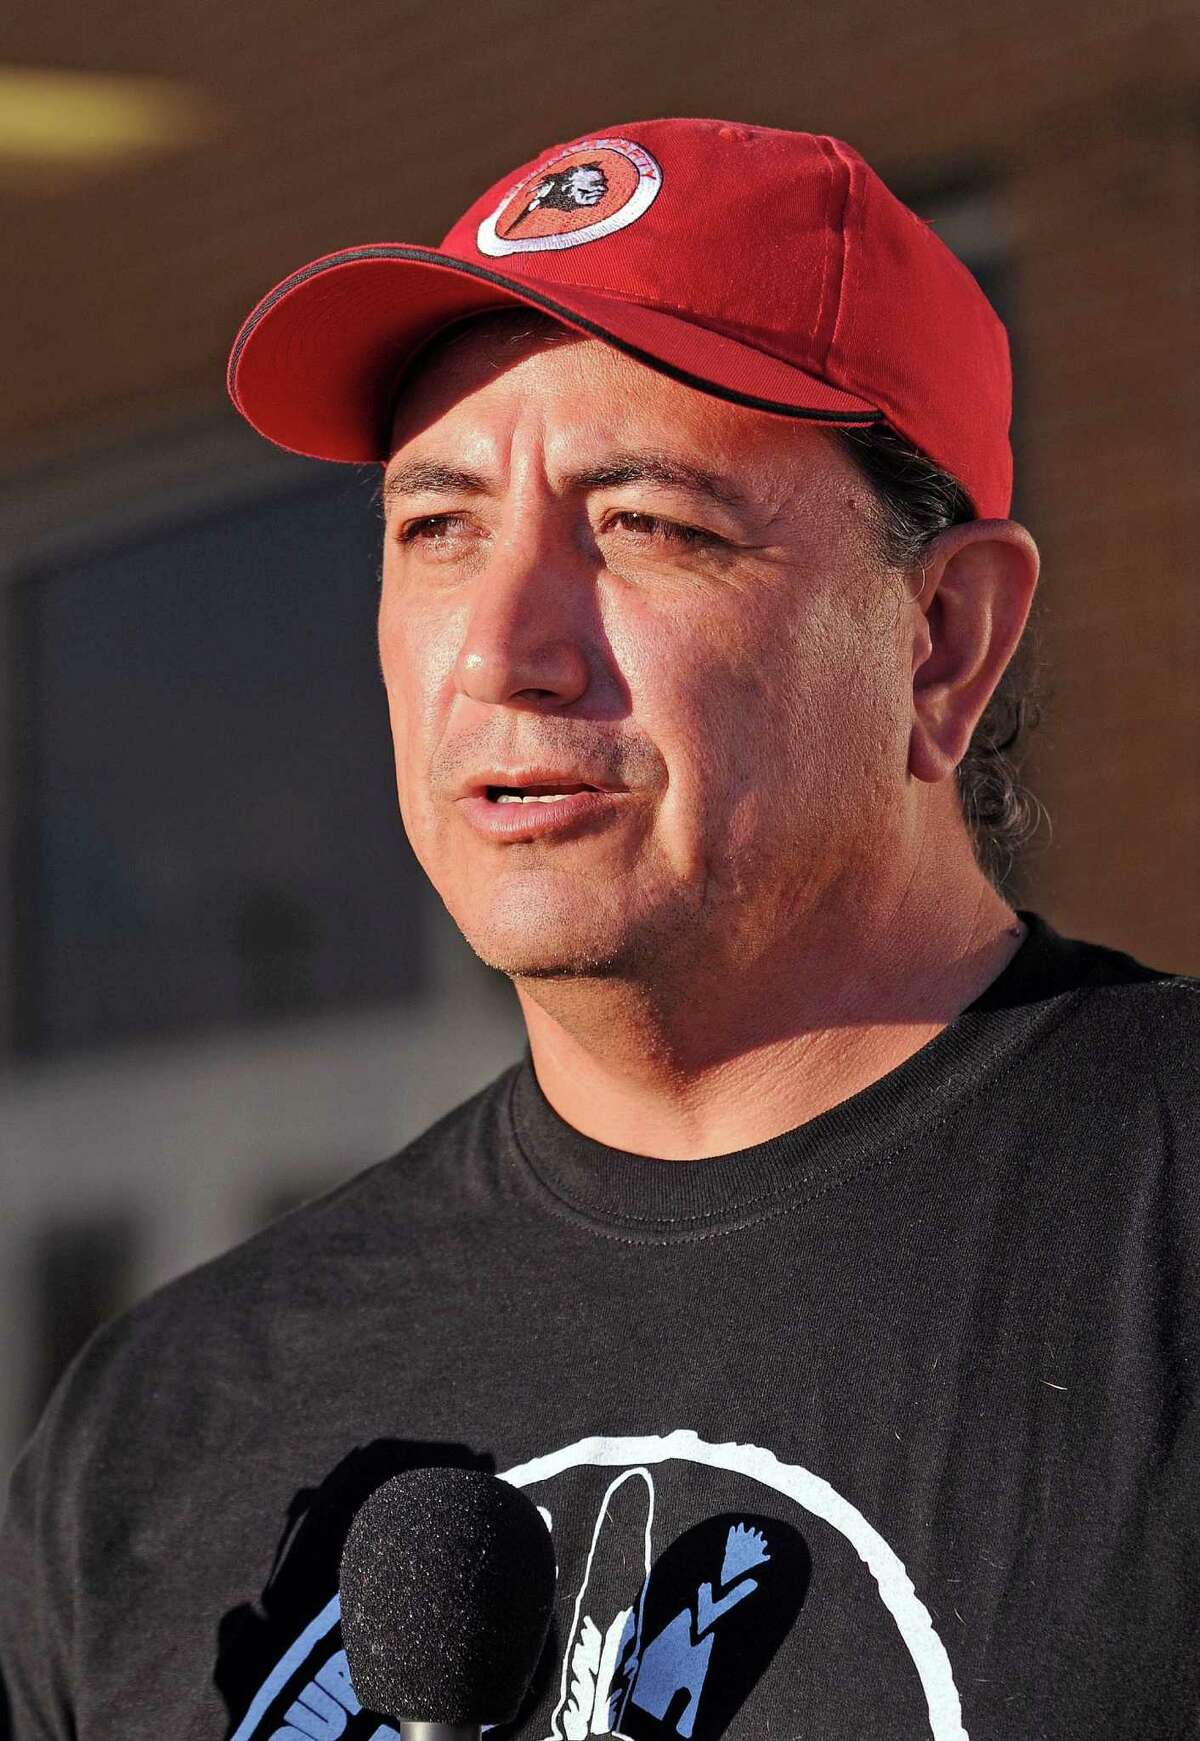 Standing Rock Sioux tribal chairman Dave Archambault II speaks during a news conference, Tuesday, Sept. 6, 2016 in Bismarck, N.D. An American Indian tribe succeeded Tuesday in getting a federal judge to temporarily stop construction on some, but not all, of a $3.8 billion four-state oil pipeline, but its broader request still hangs in the balance. (Tom Stromme/The Bismarck Tribune via AP)